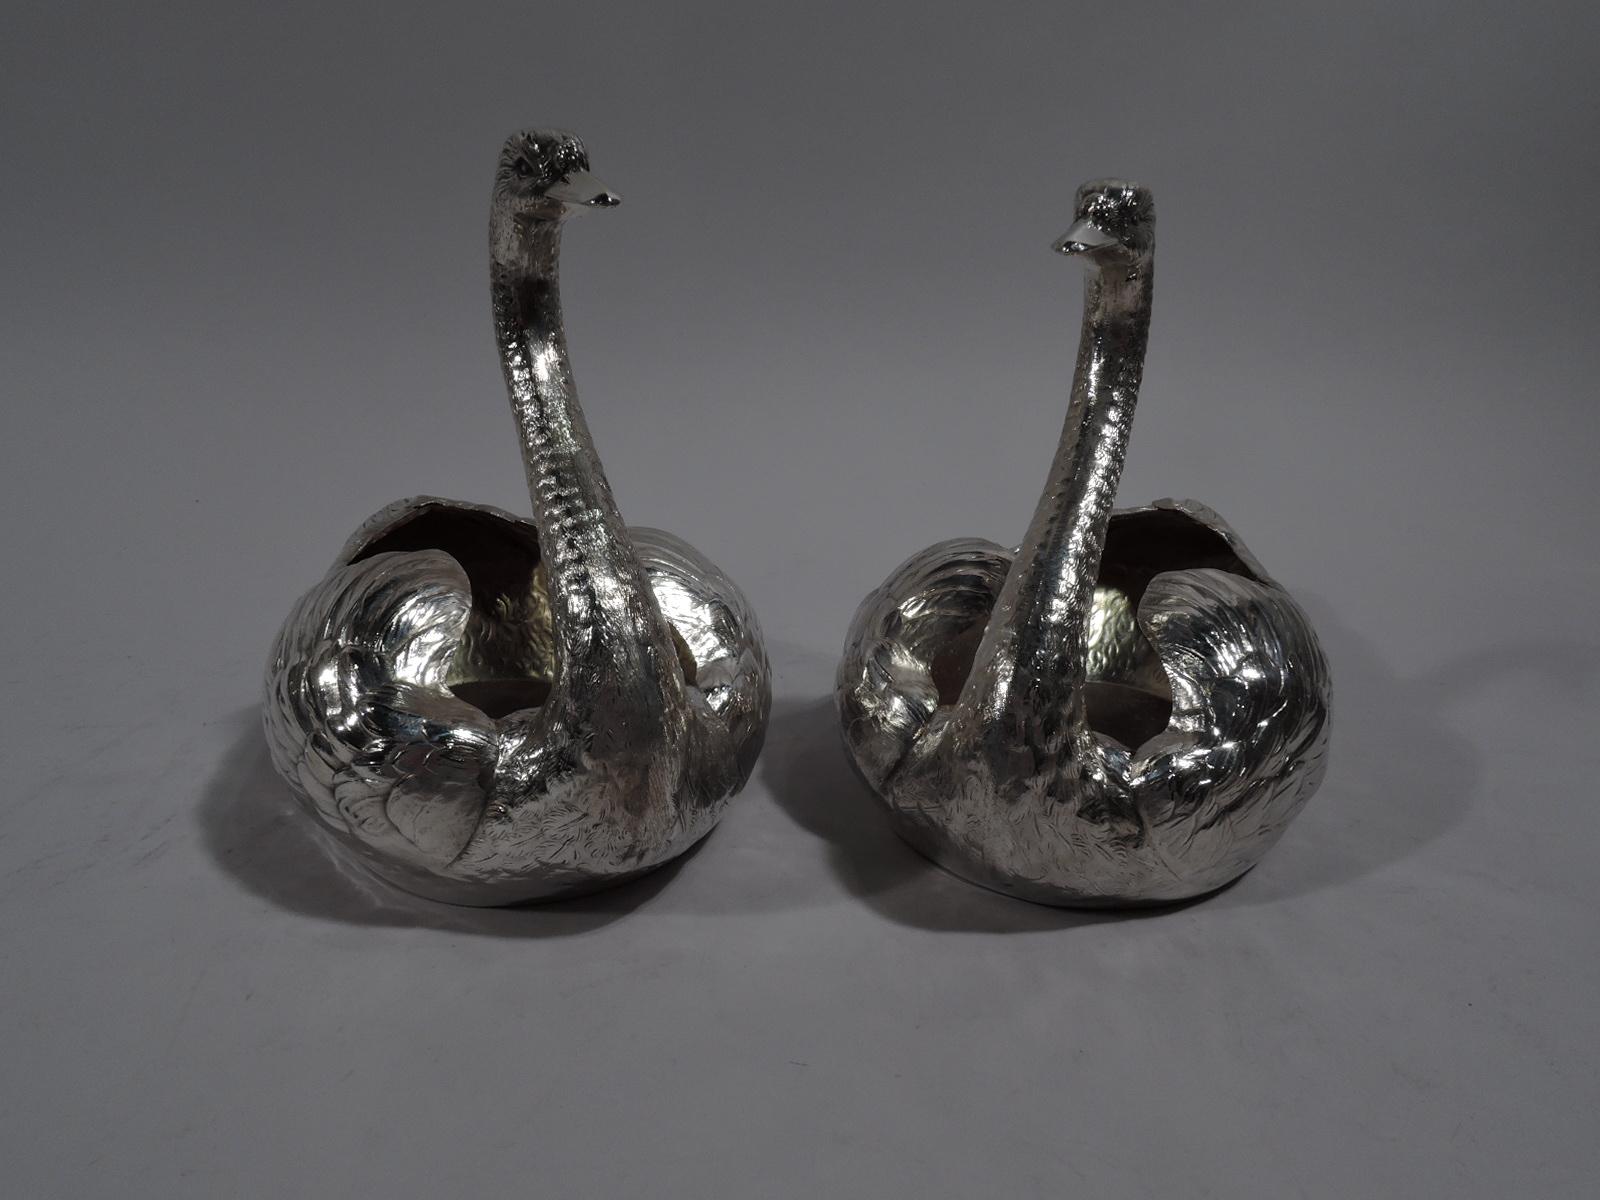 Pair of sterling silver swans. Made by Durgin (part of Gorham) in Concord, New Hampshire, circa 1920. Each: Fine feathering with downy plumed wings and scaly neck as well as closed bill and penetrating eyes. Hollow gilt-washed bodies to be filled